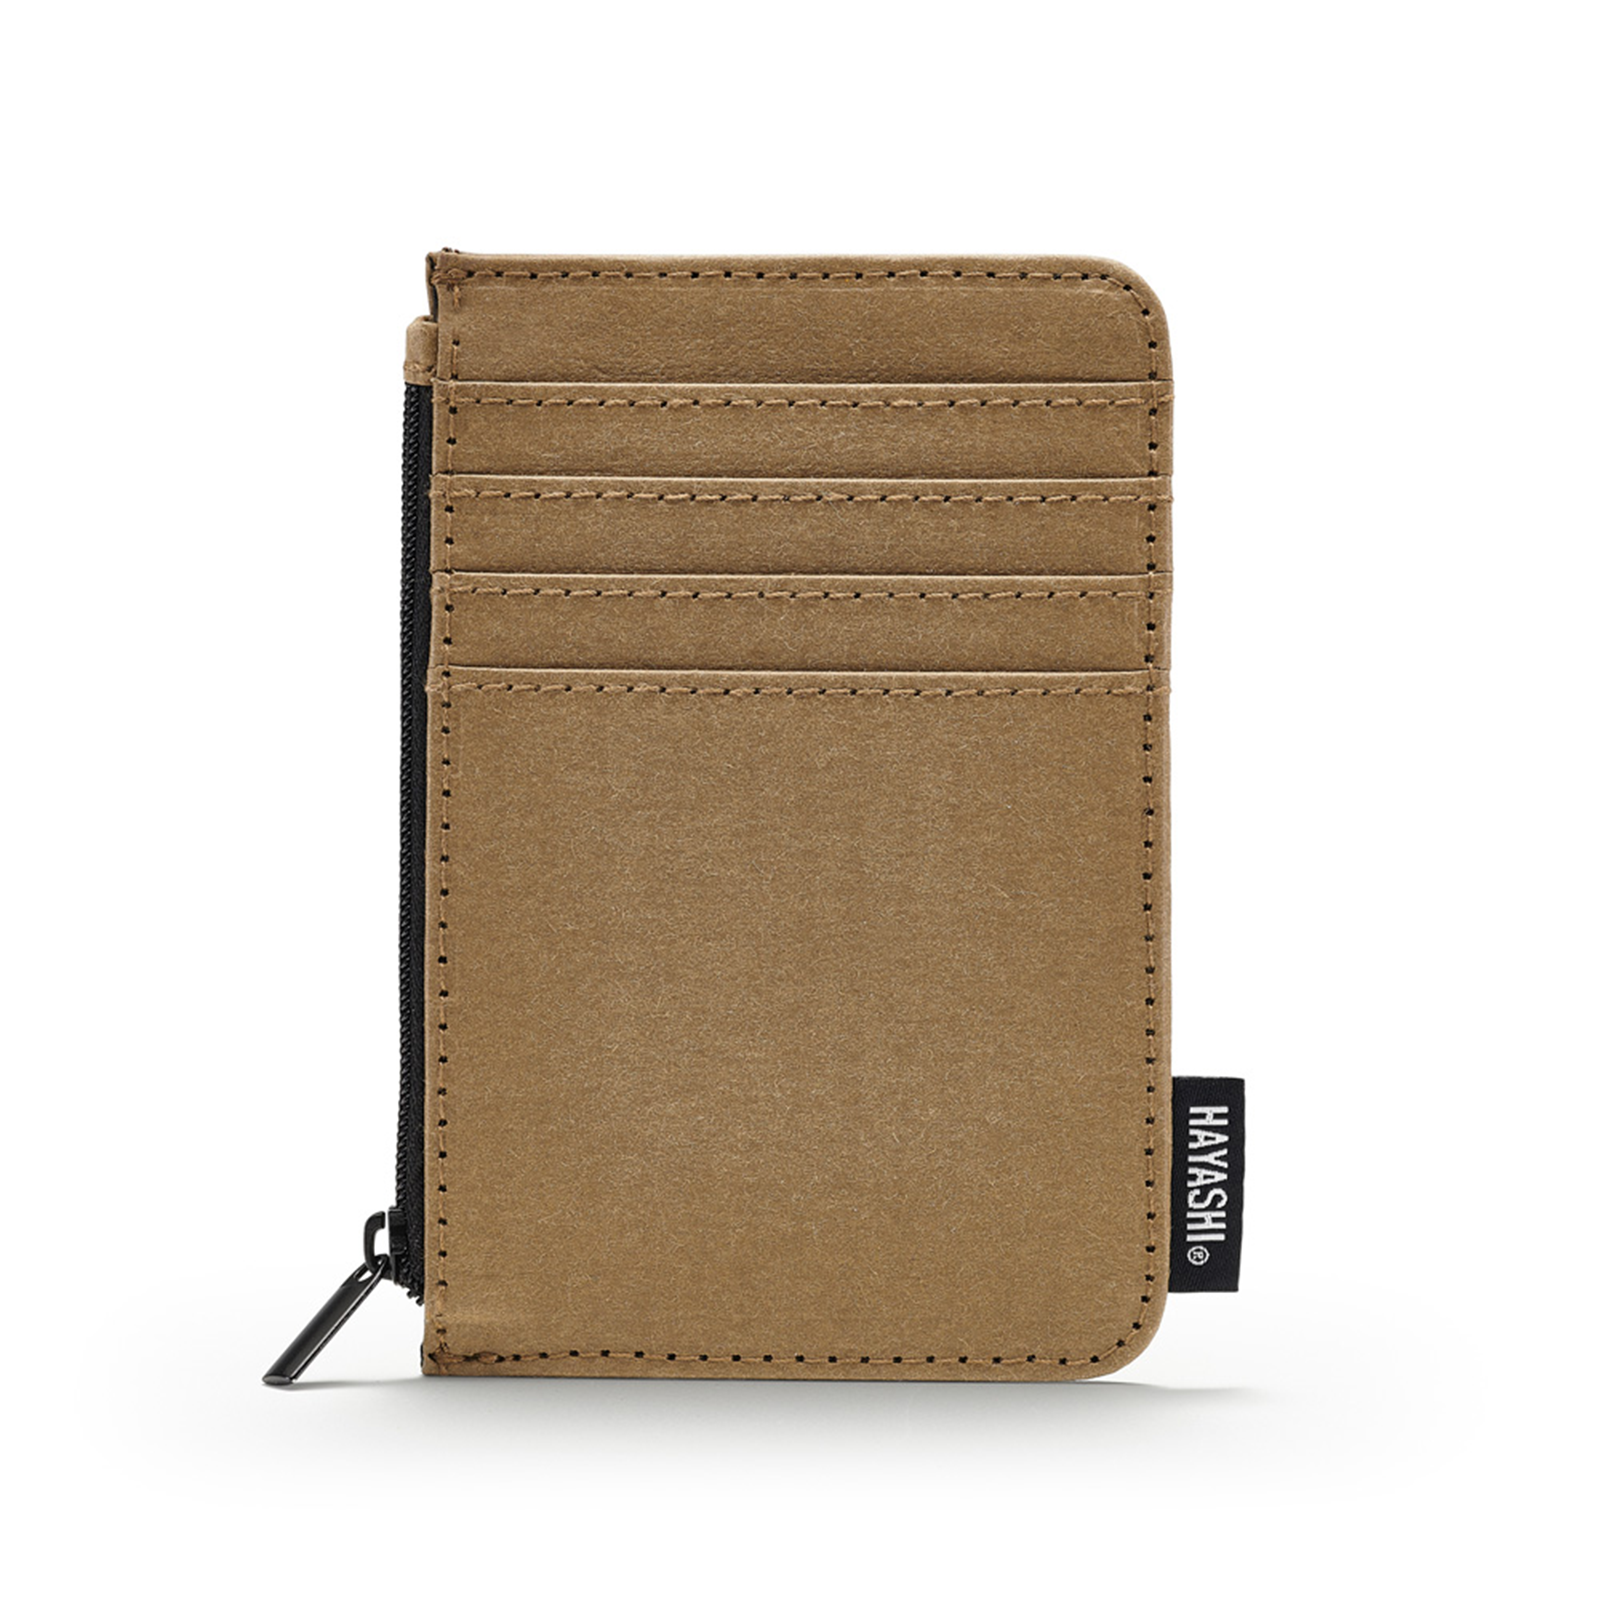 Hayashi Vegan Paper Leather Zipped Card Case in Tan Colour